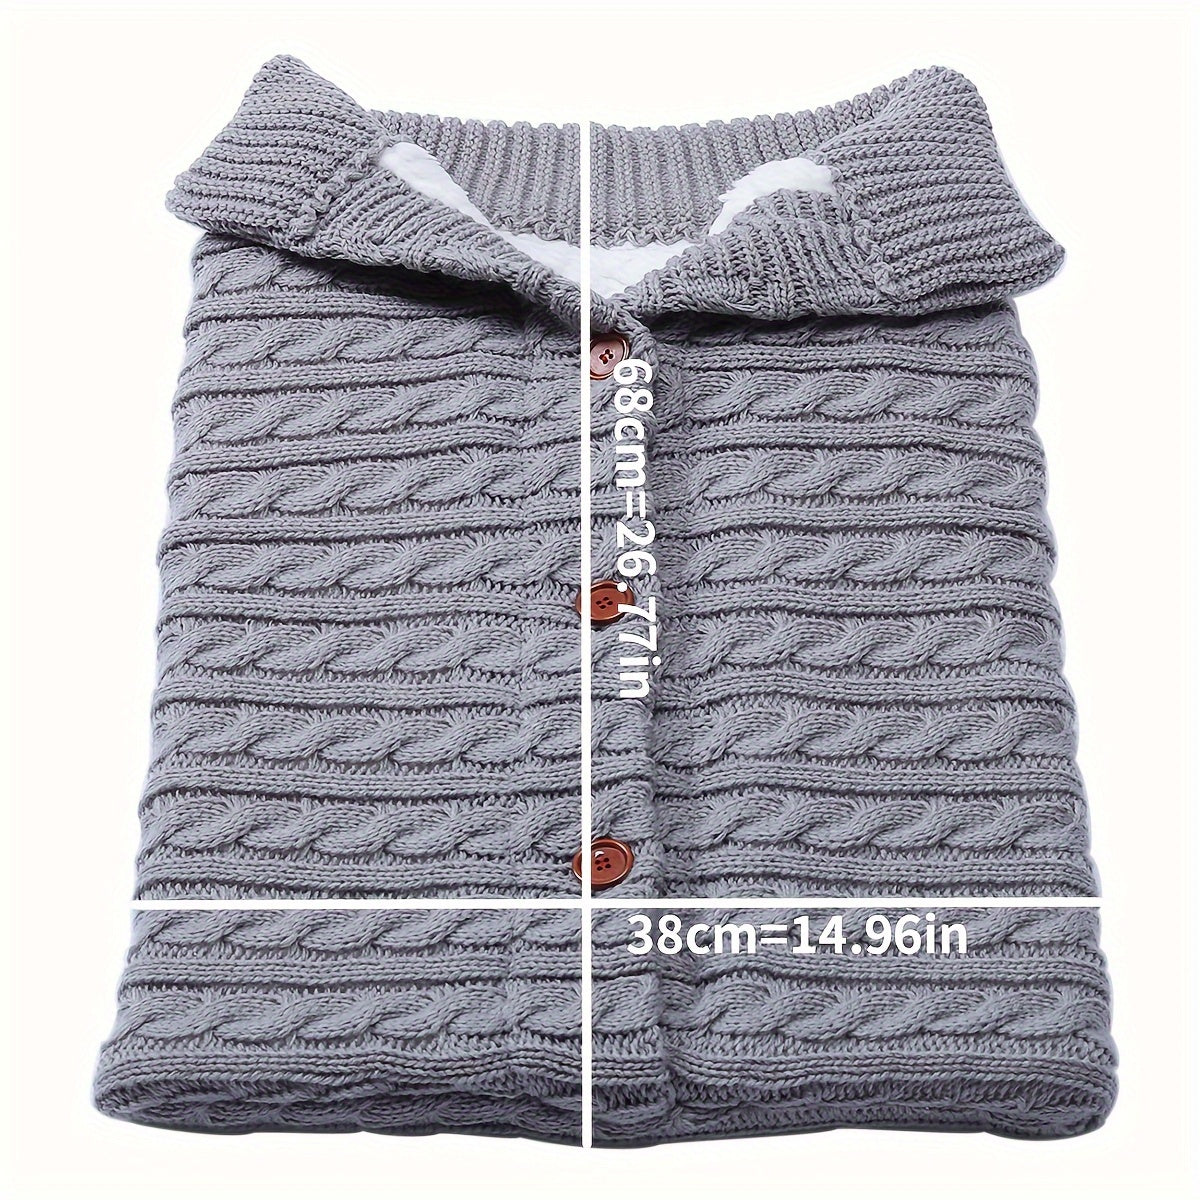 1pc Sleeping Bag, For Stroller Outdoor Use, Knitted Button Sleeping Bag, For Autumn And Winter, With Pile And Thick Blanket